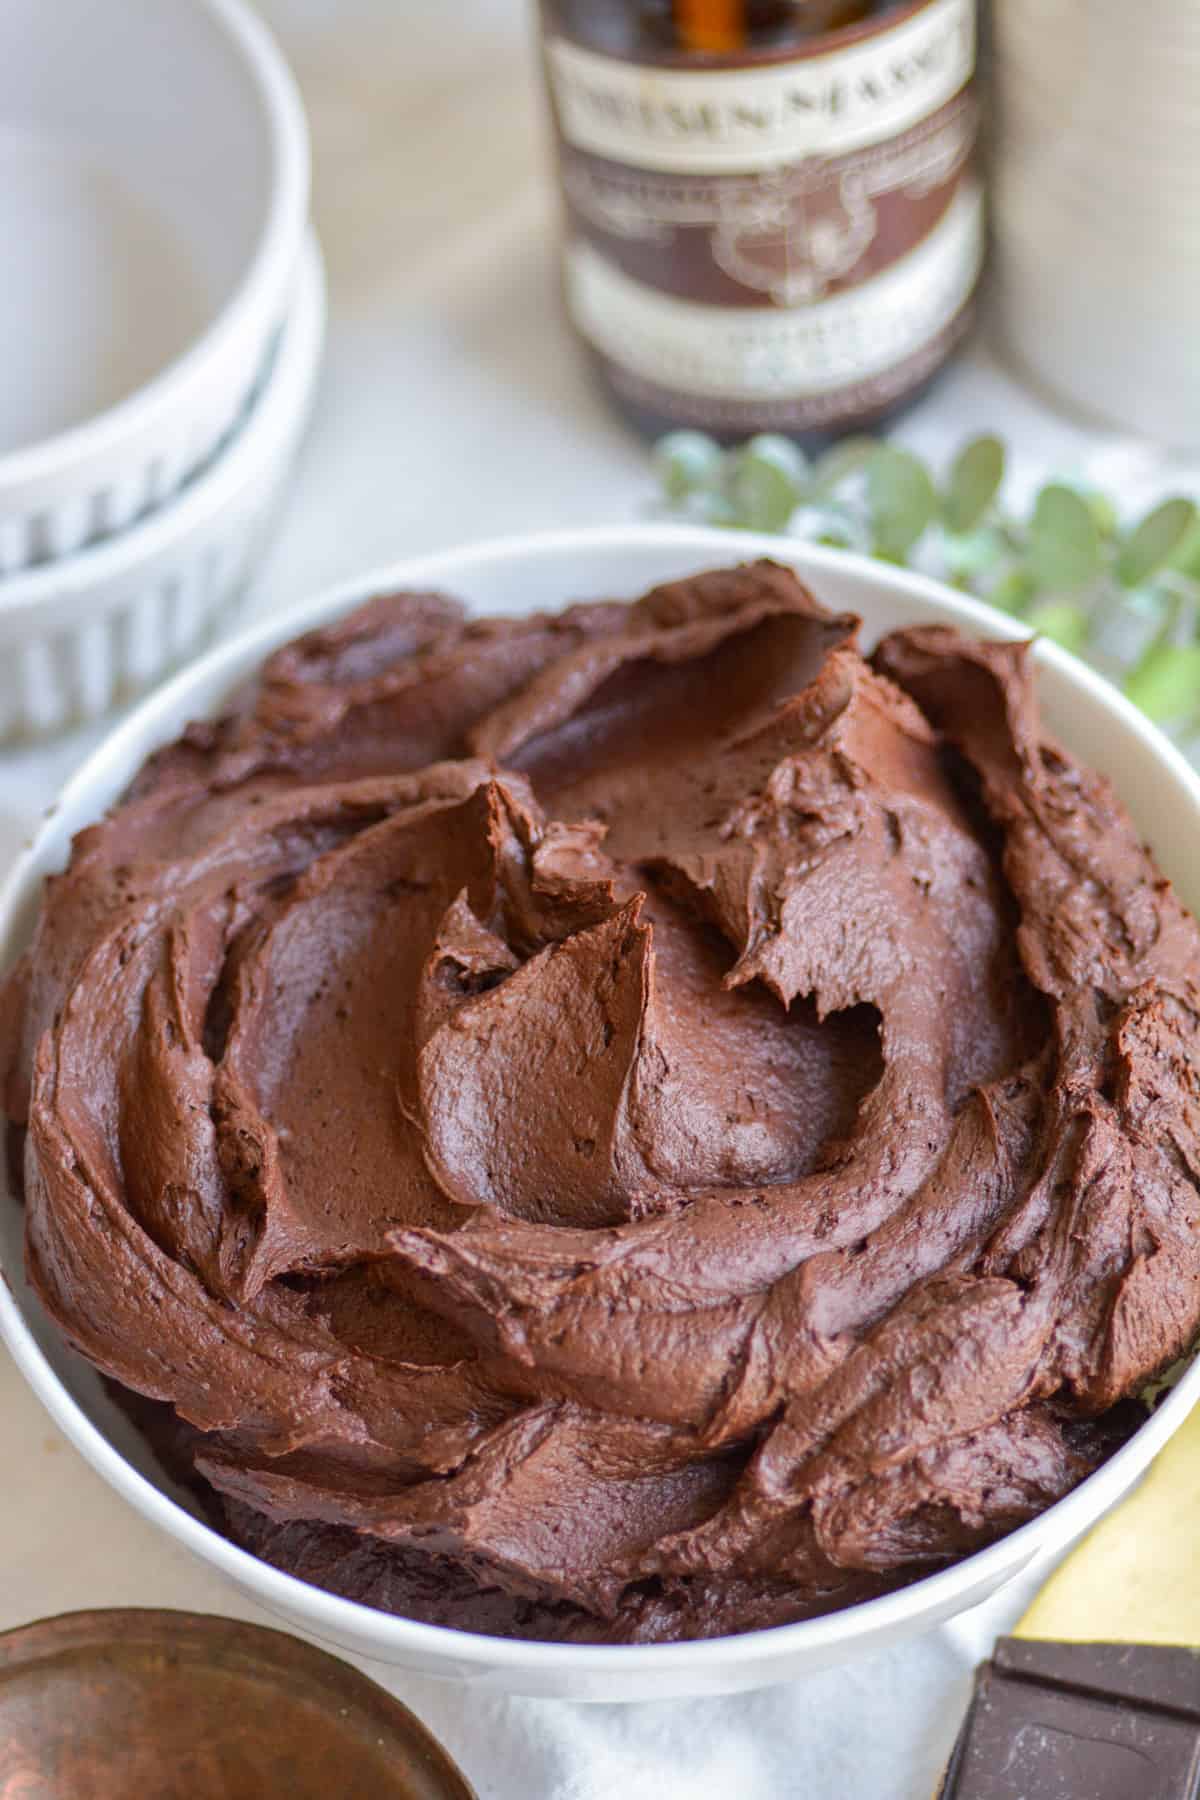 Vegan Chocolate Buttercream Frosting in a white bowl on a white cloth.